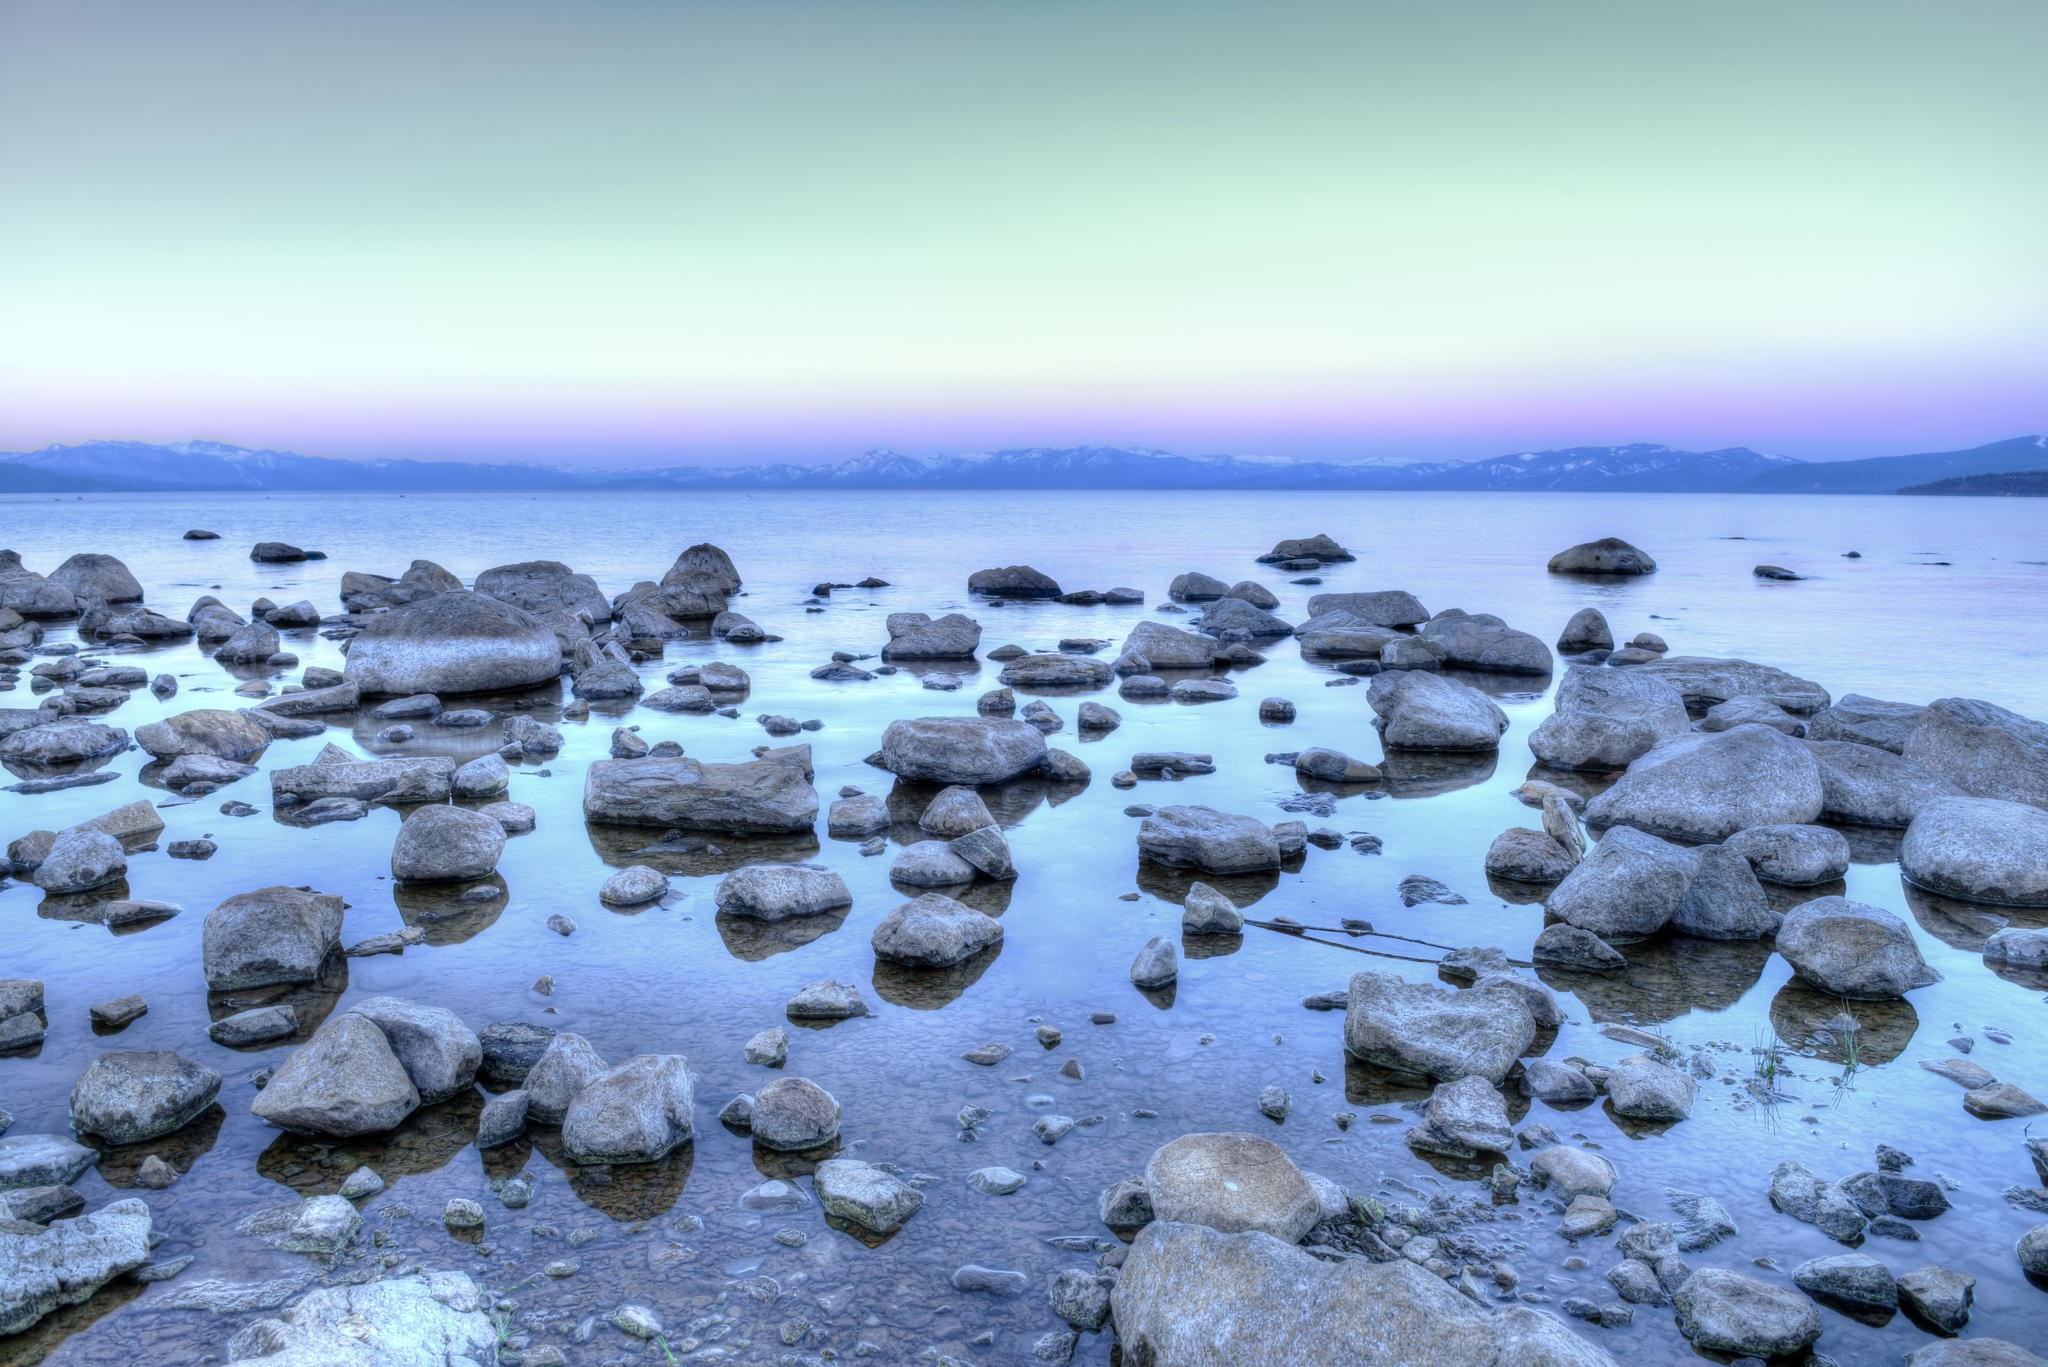 General 2048x1367 500px landscape photography nature water stones